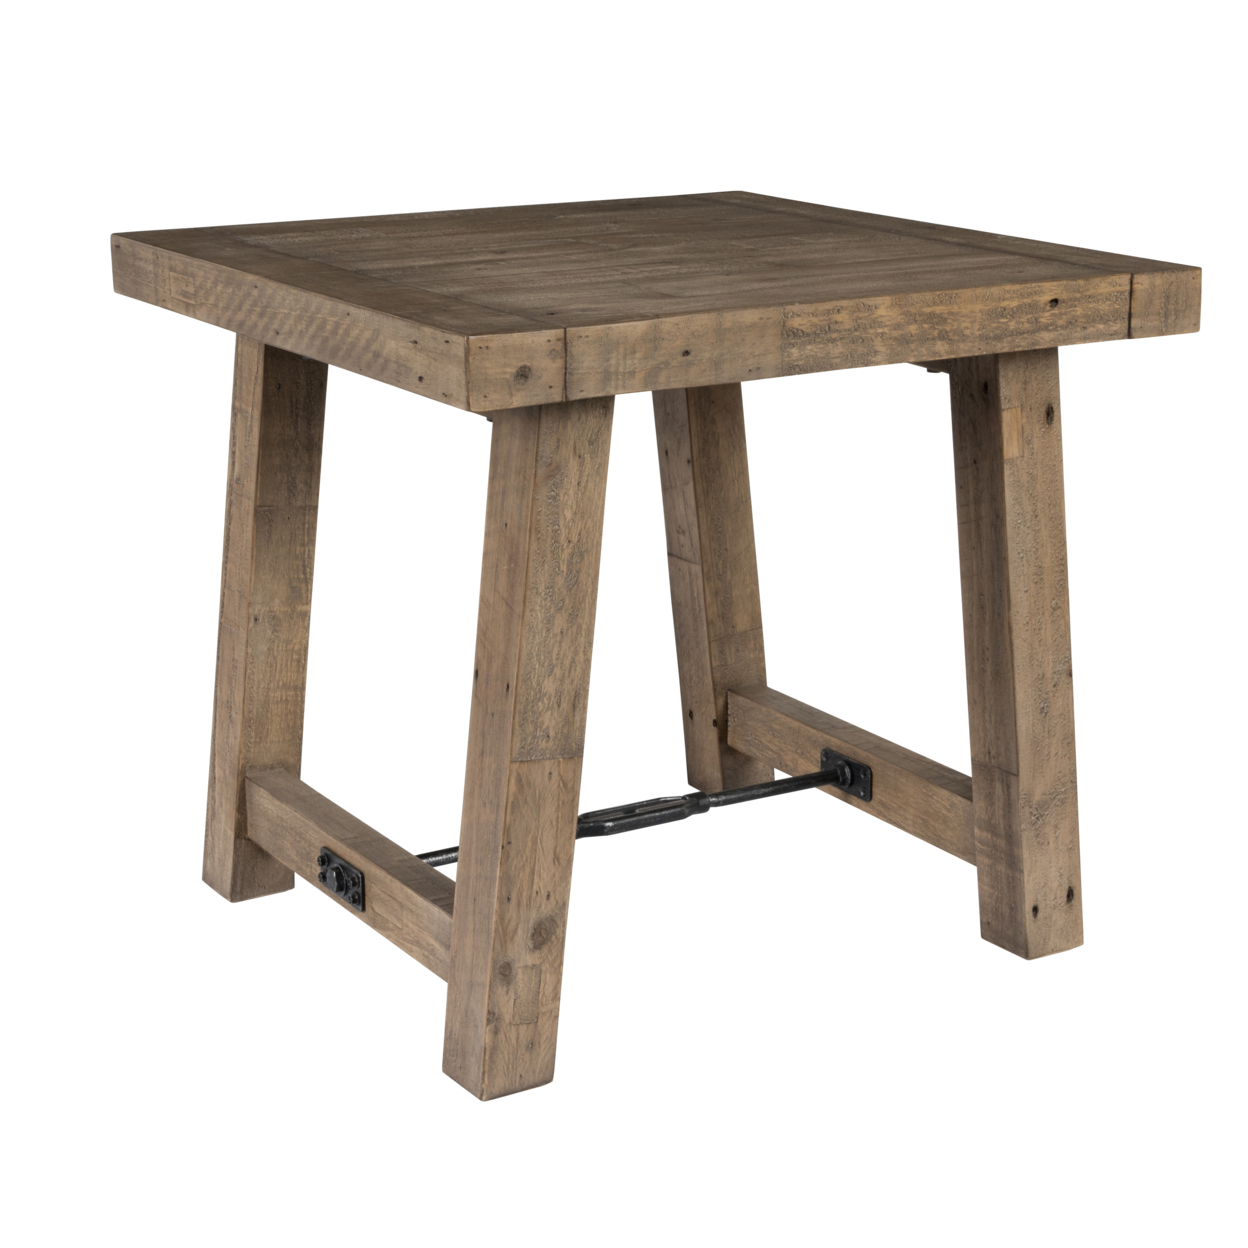 Handcrafted Reclaimed Wood End Table With Grains, Weathered Gray- Saltoro Sherpi